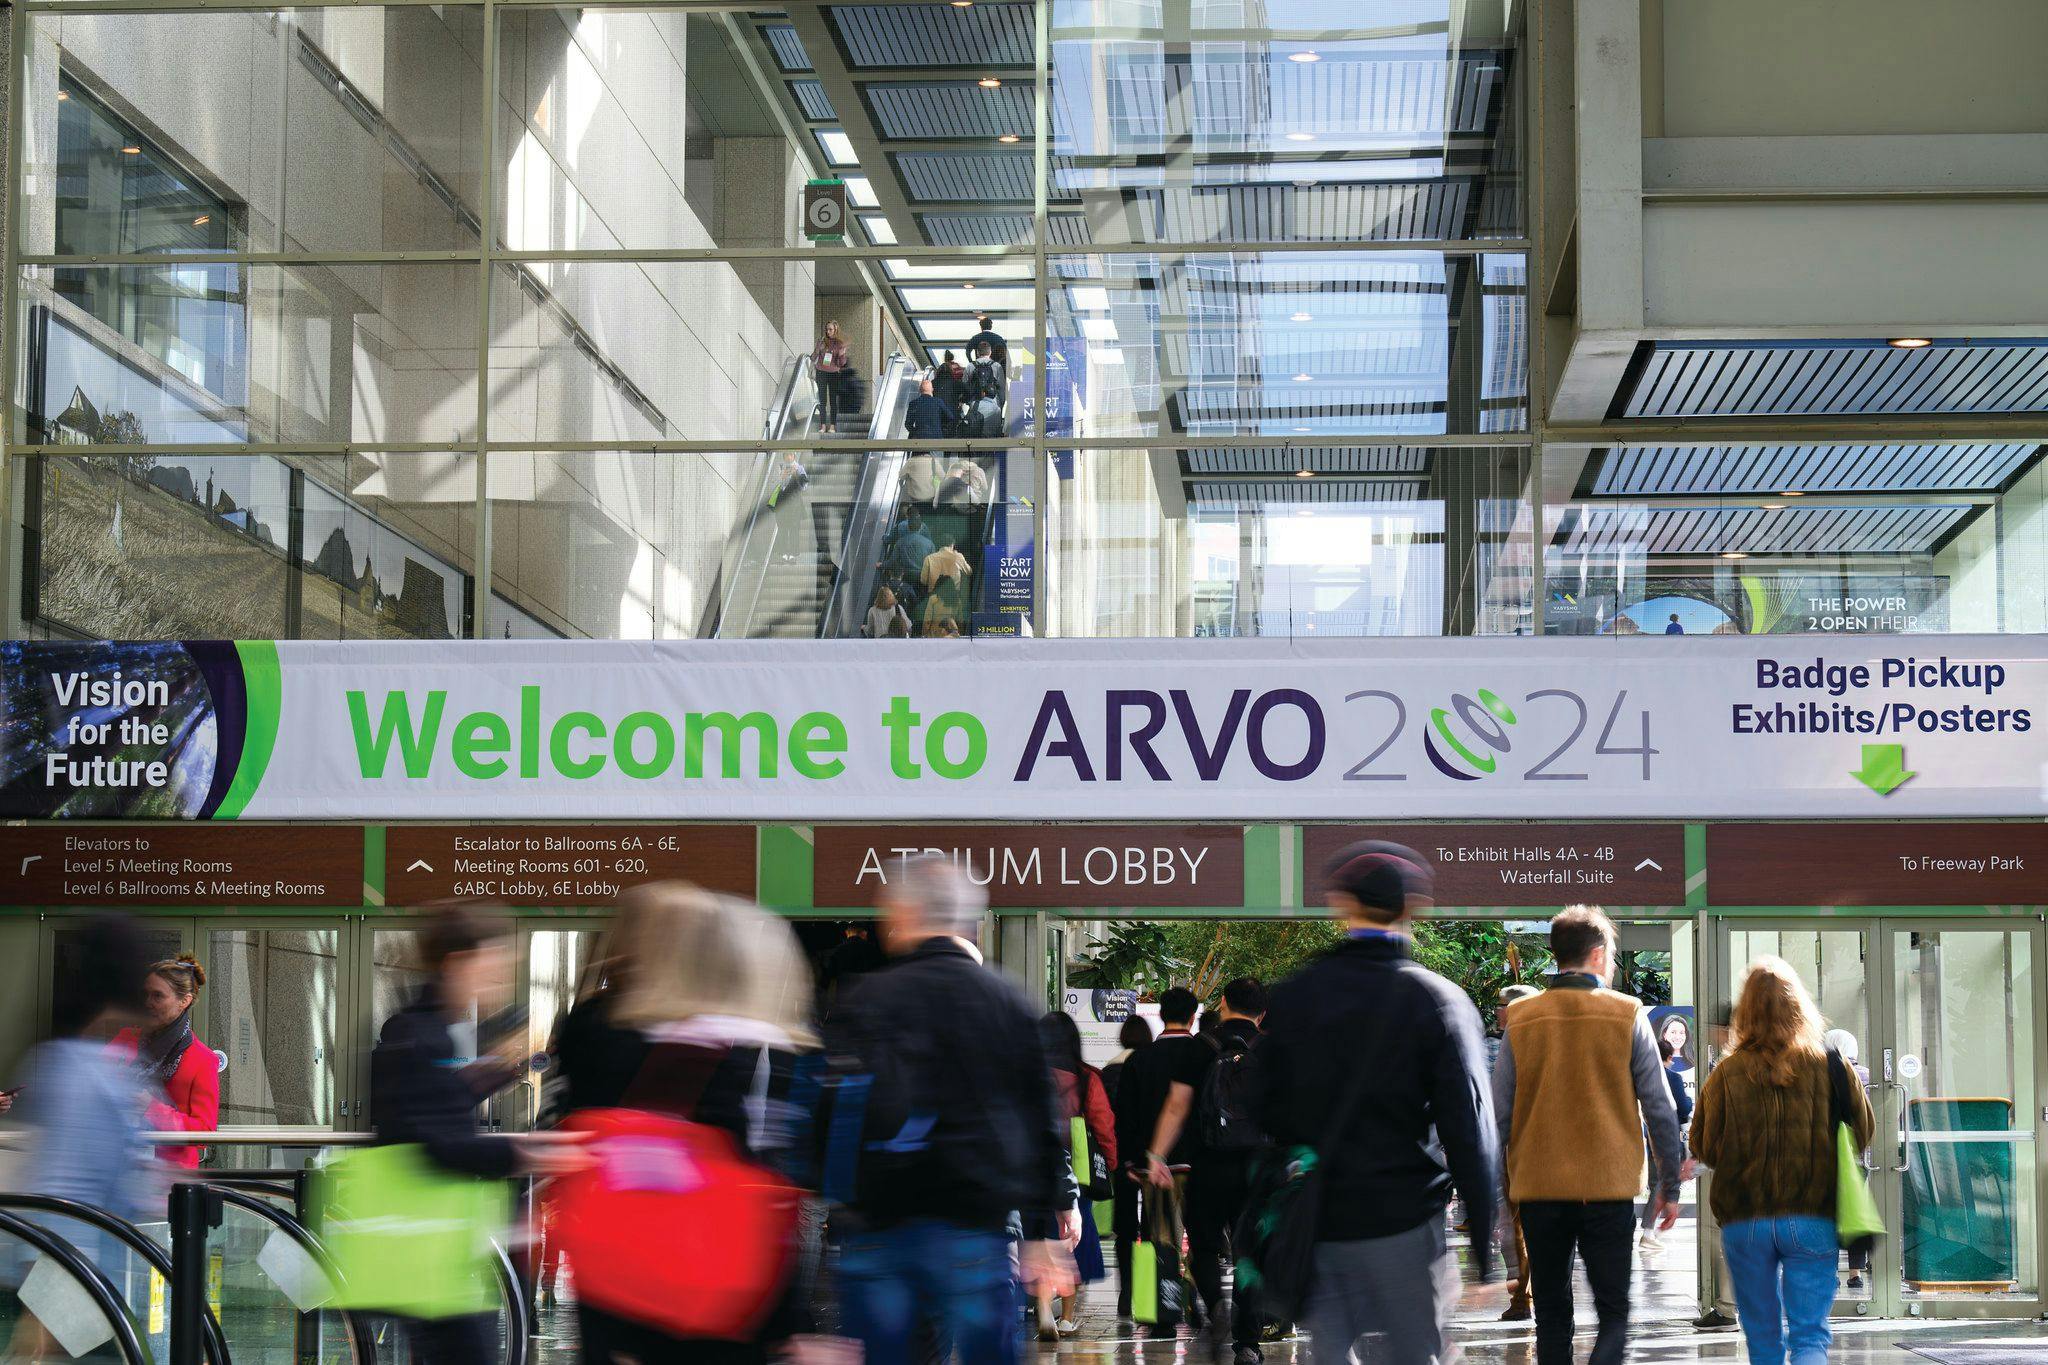 The entrance to the 2024 ARVO meeting. Image provided courtesy of the Association for Research in Vision and Ophthalmology (ARVO).